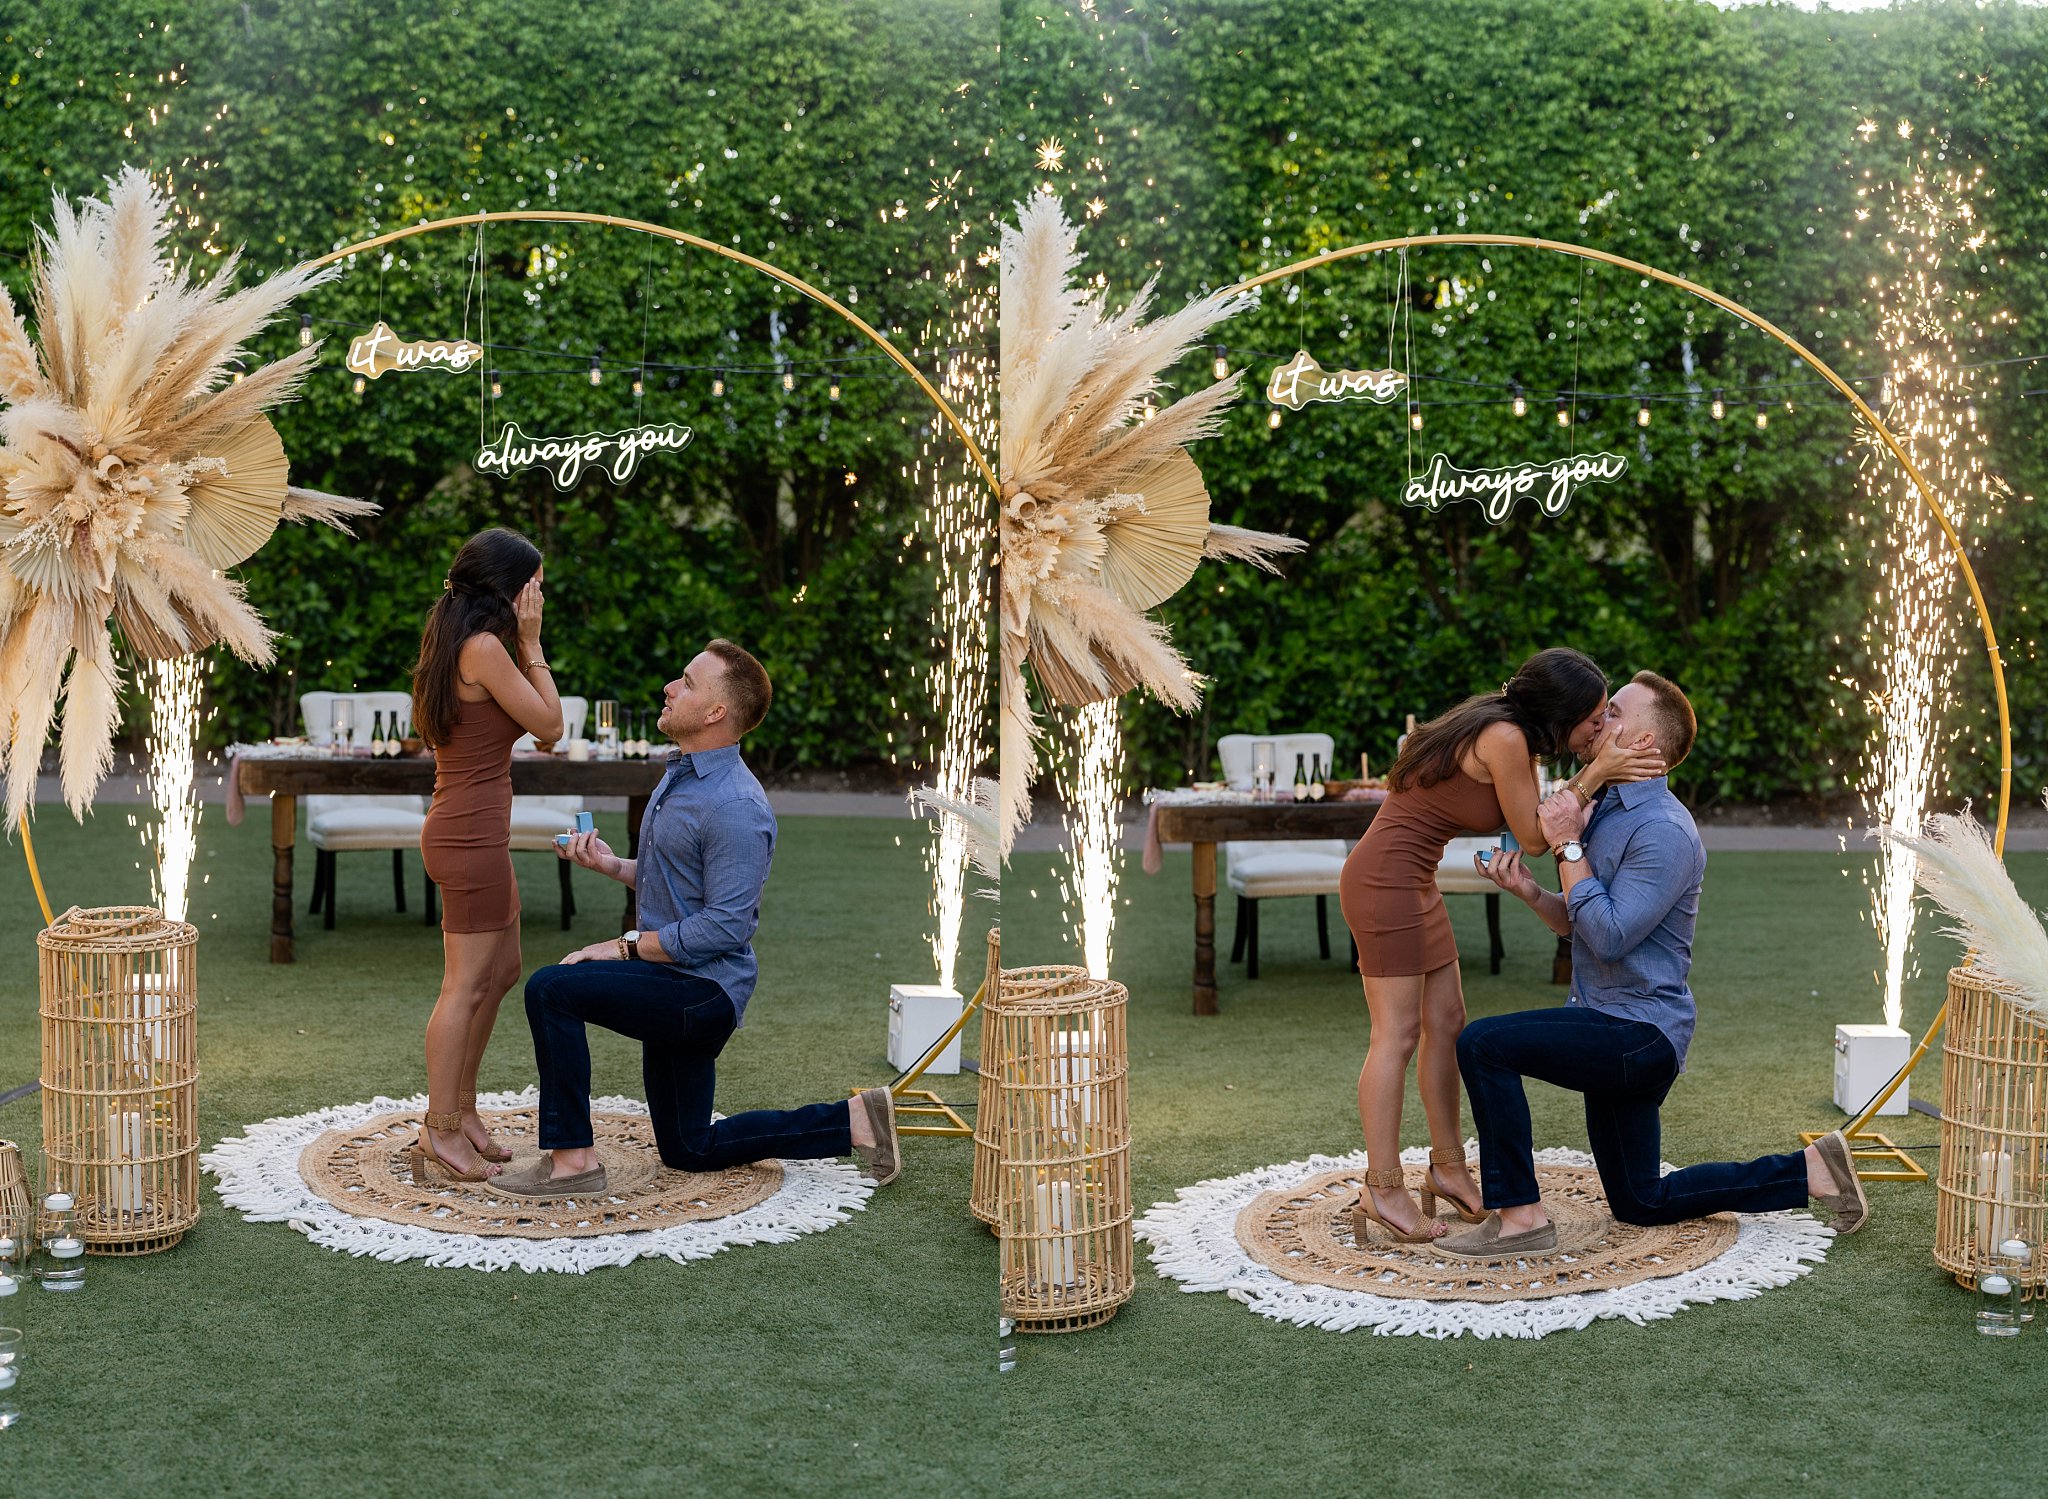 Bride to be looks shocked and overjoyed as her boyfriend proposes amidst candles, flowers and sparklers during Bonita Springs Proposal of a Lifetime